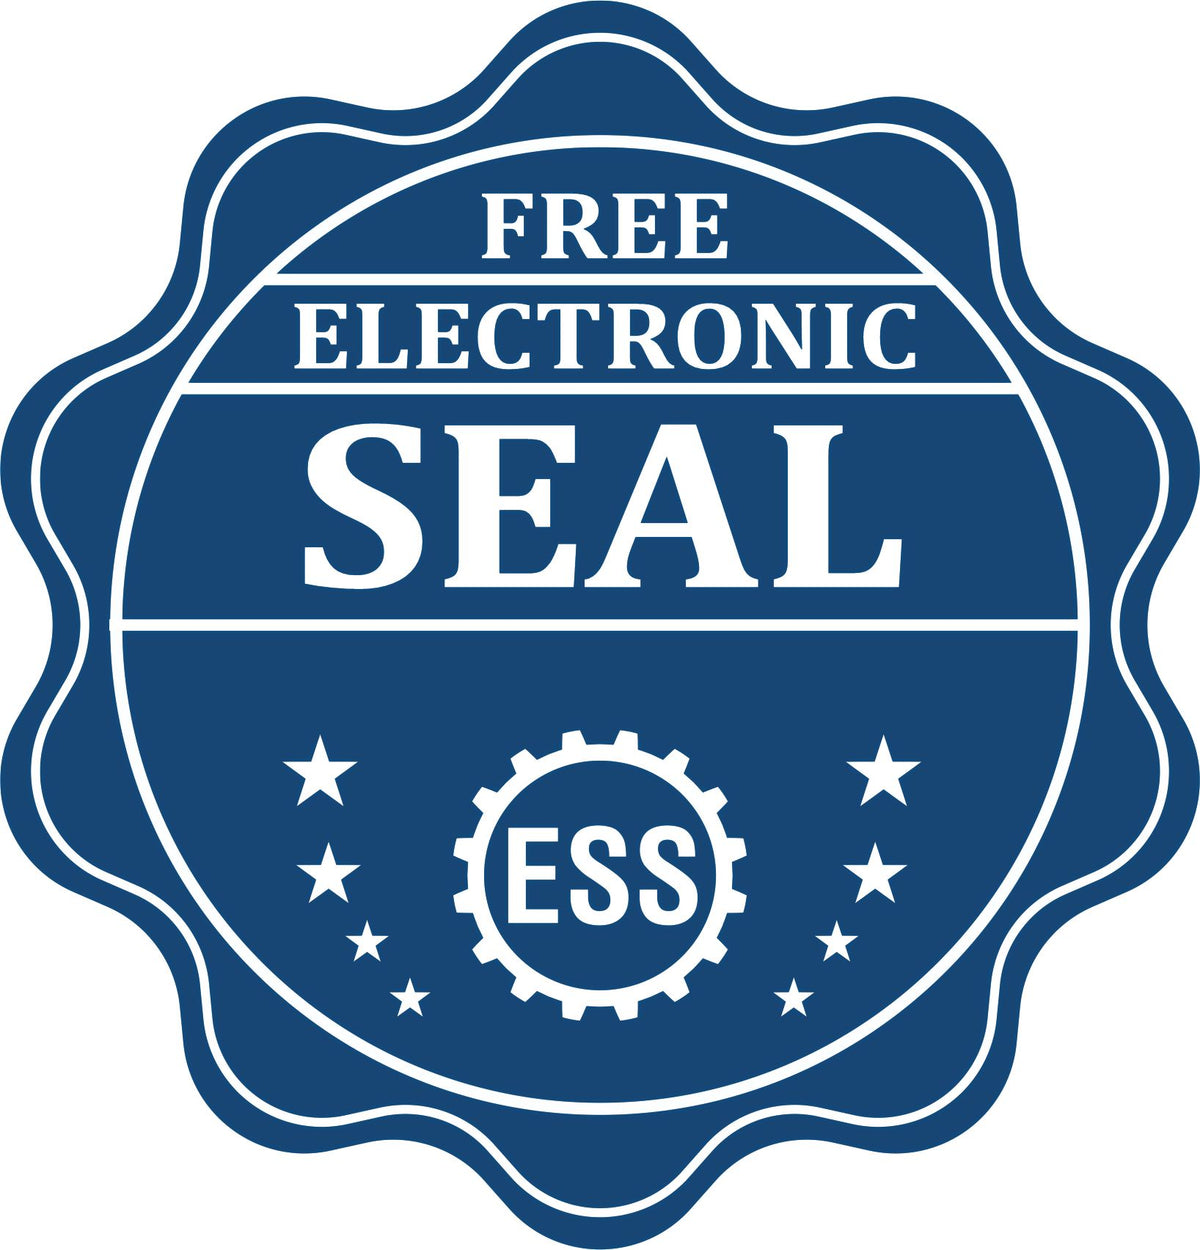 A badge showing a free electronic seal for the Soft North Carolina Professional Geologist Seal with stars and the ESS gear on the emblem.